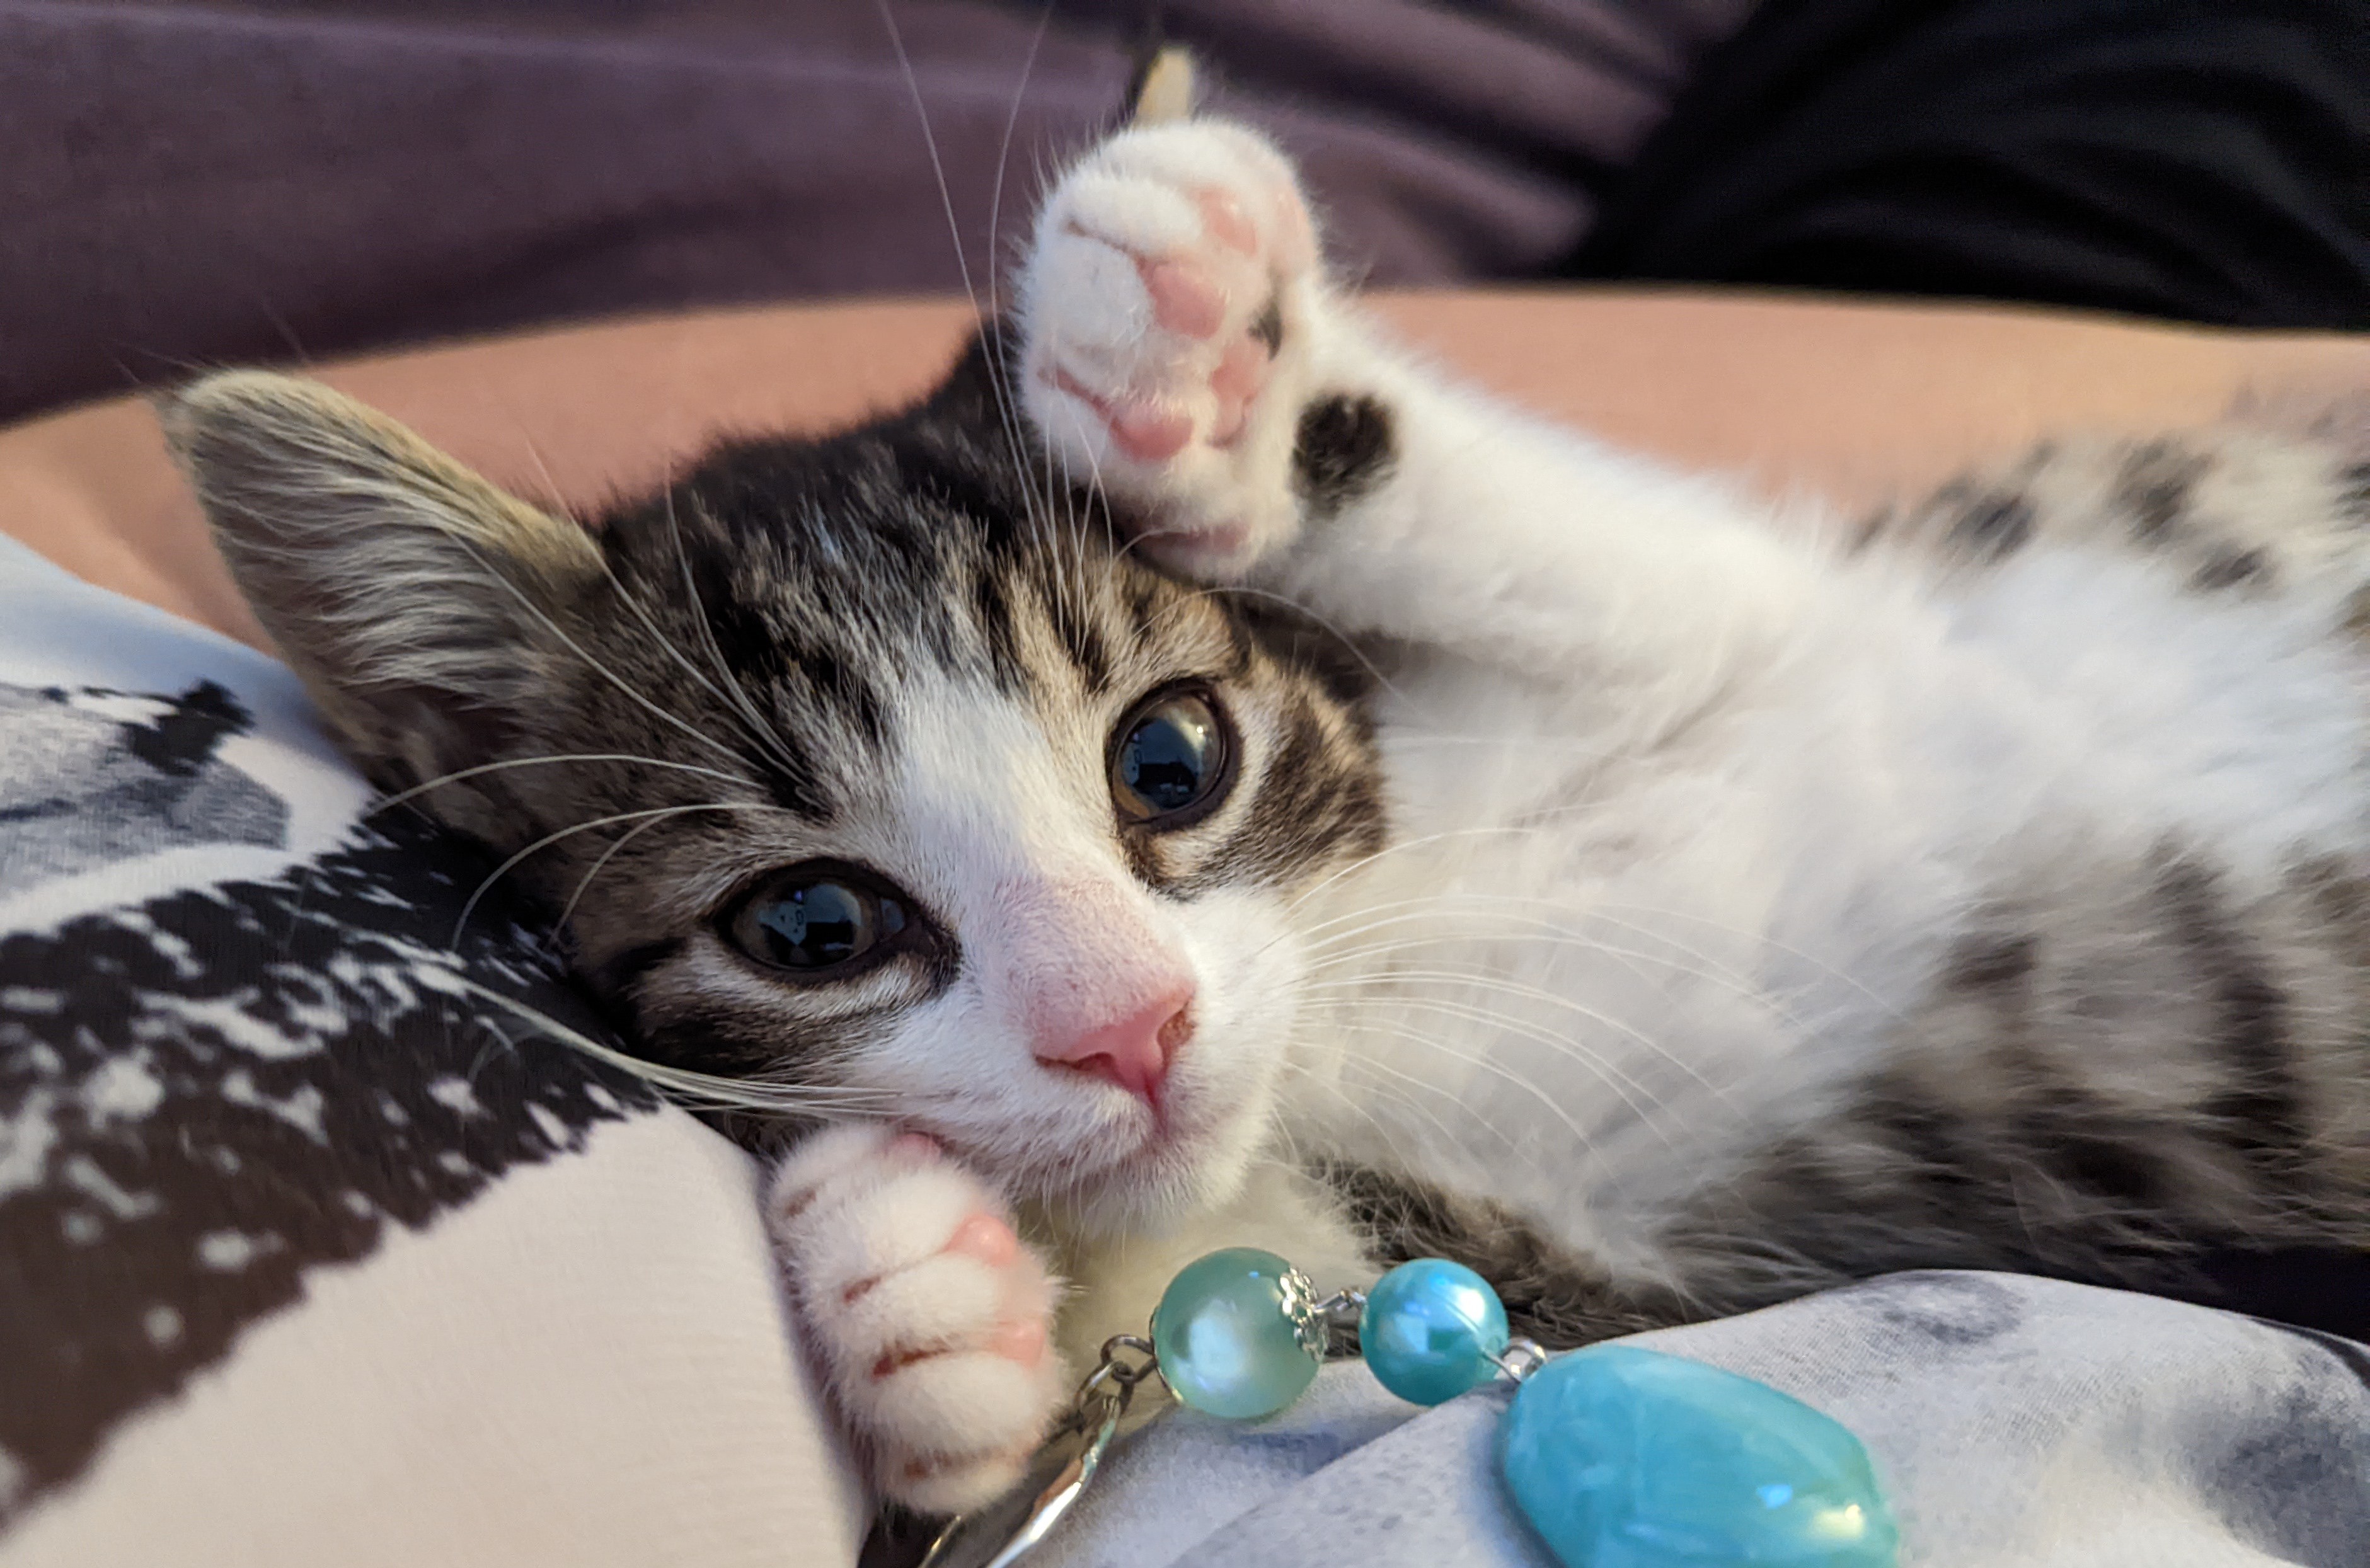 Watch cute cat videos to support the Humane Society at upcoming